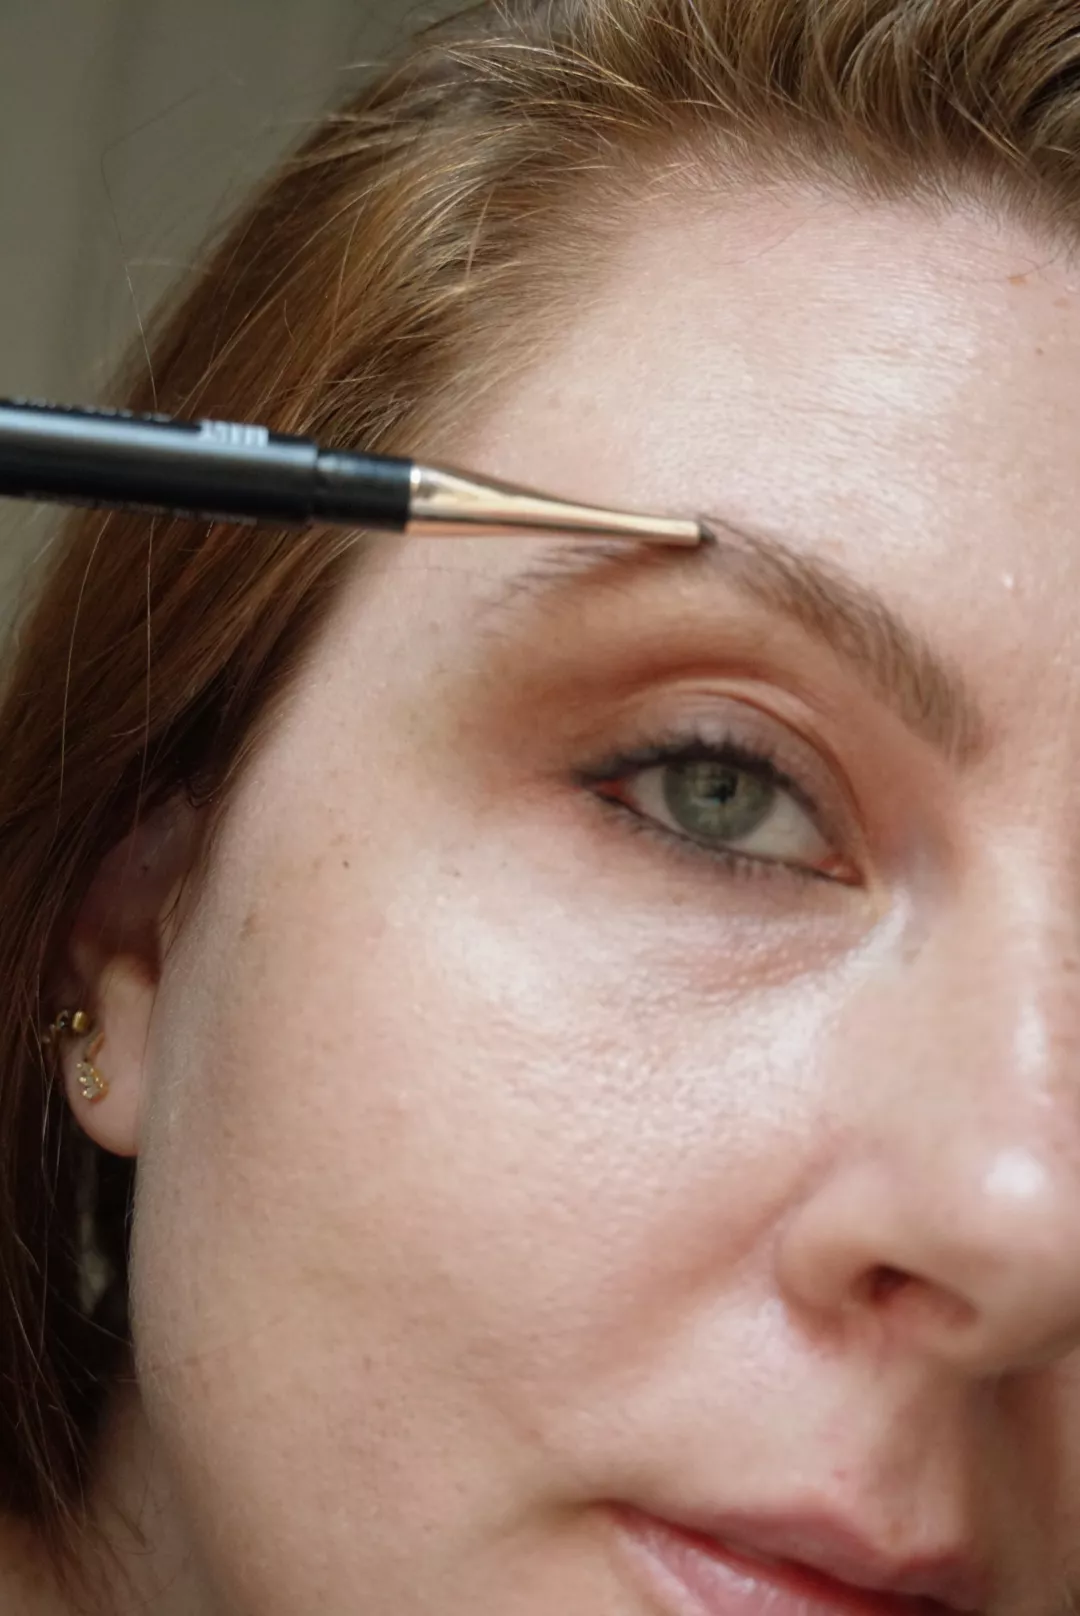 Makeup artist and Byrdie writer Ashley Rebecca fills in eyebrows with brow pencil